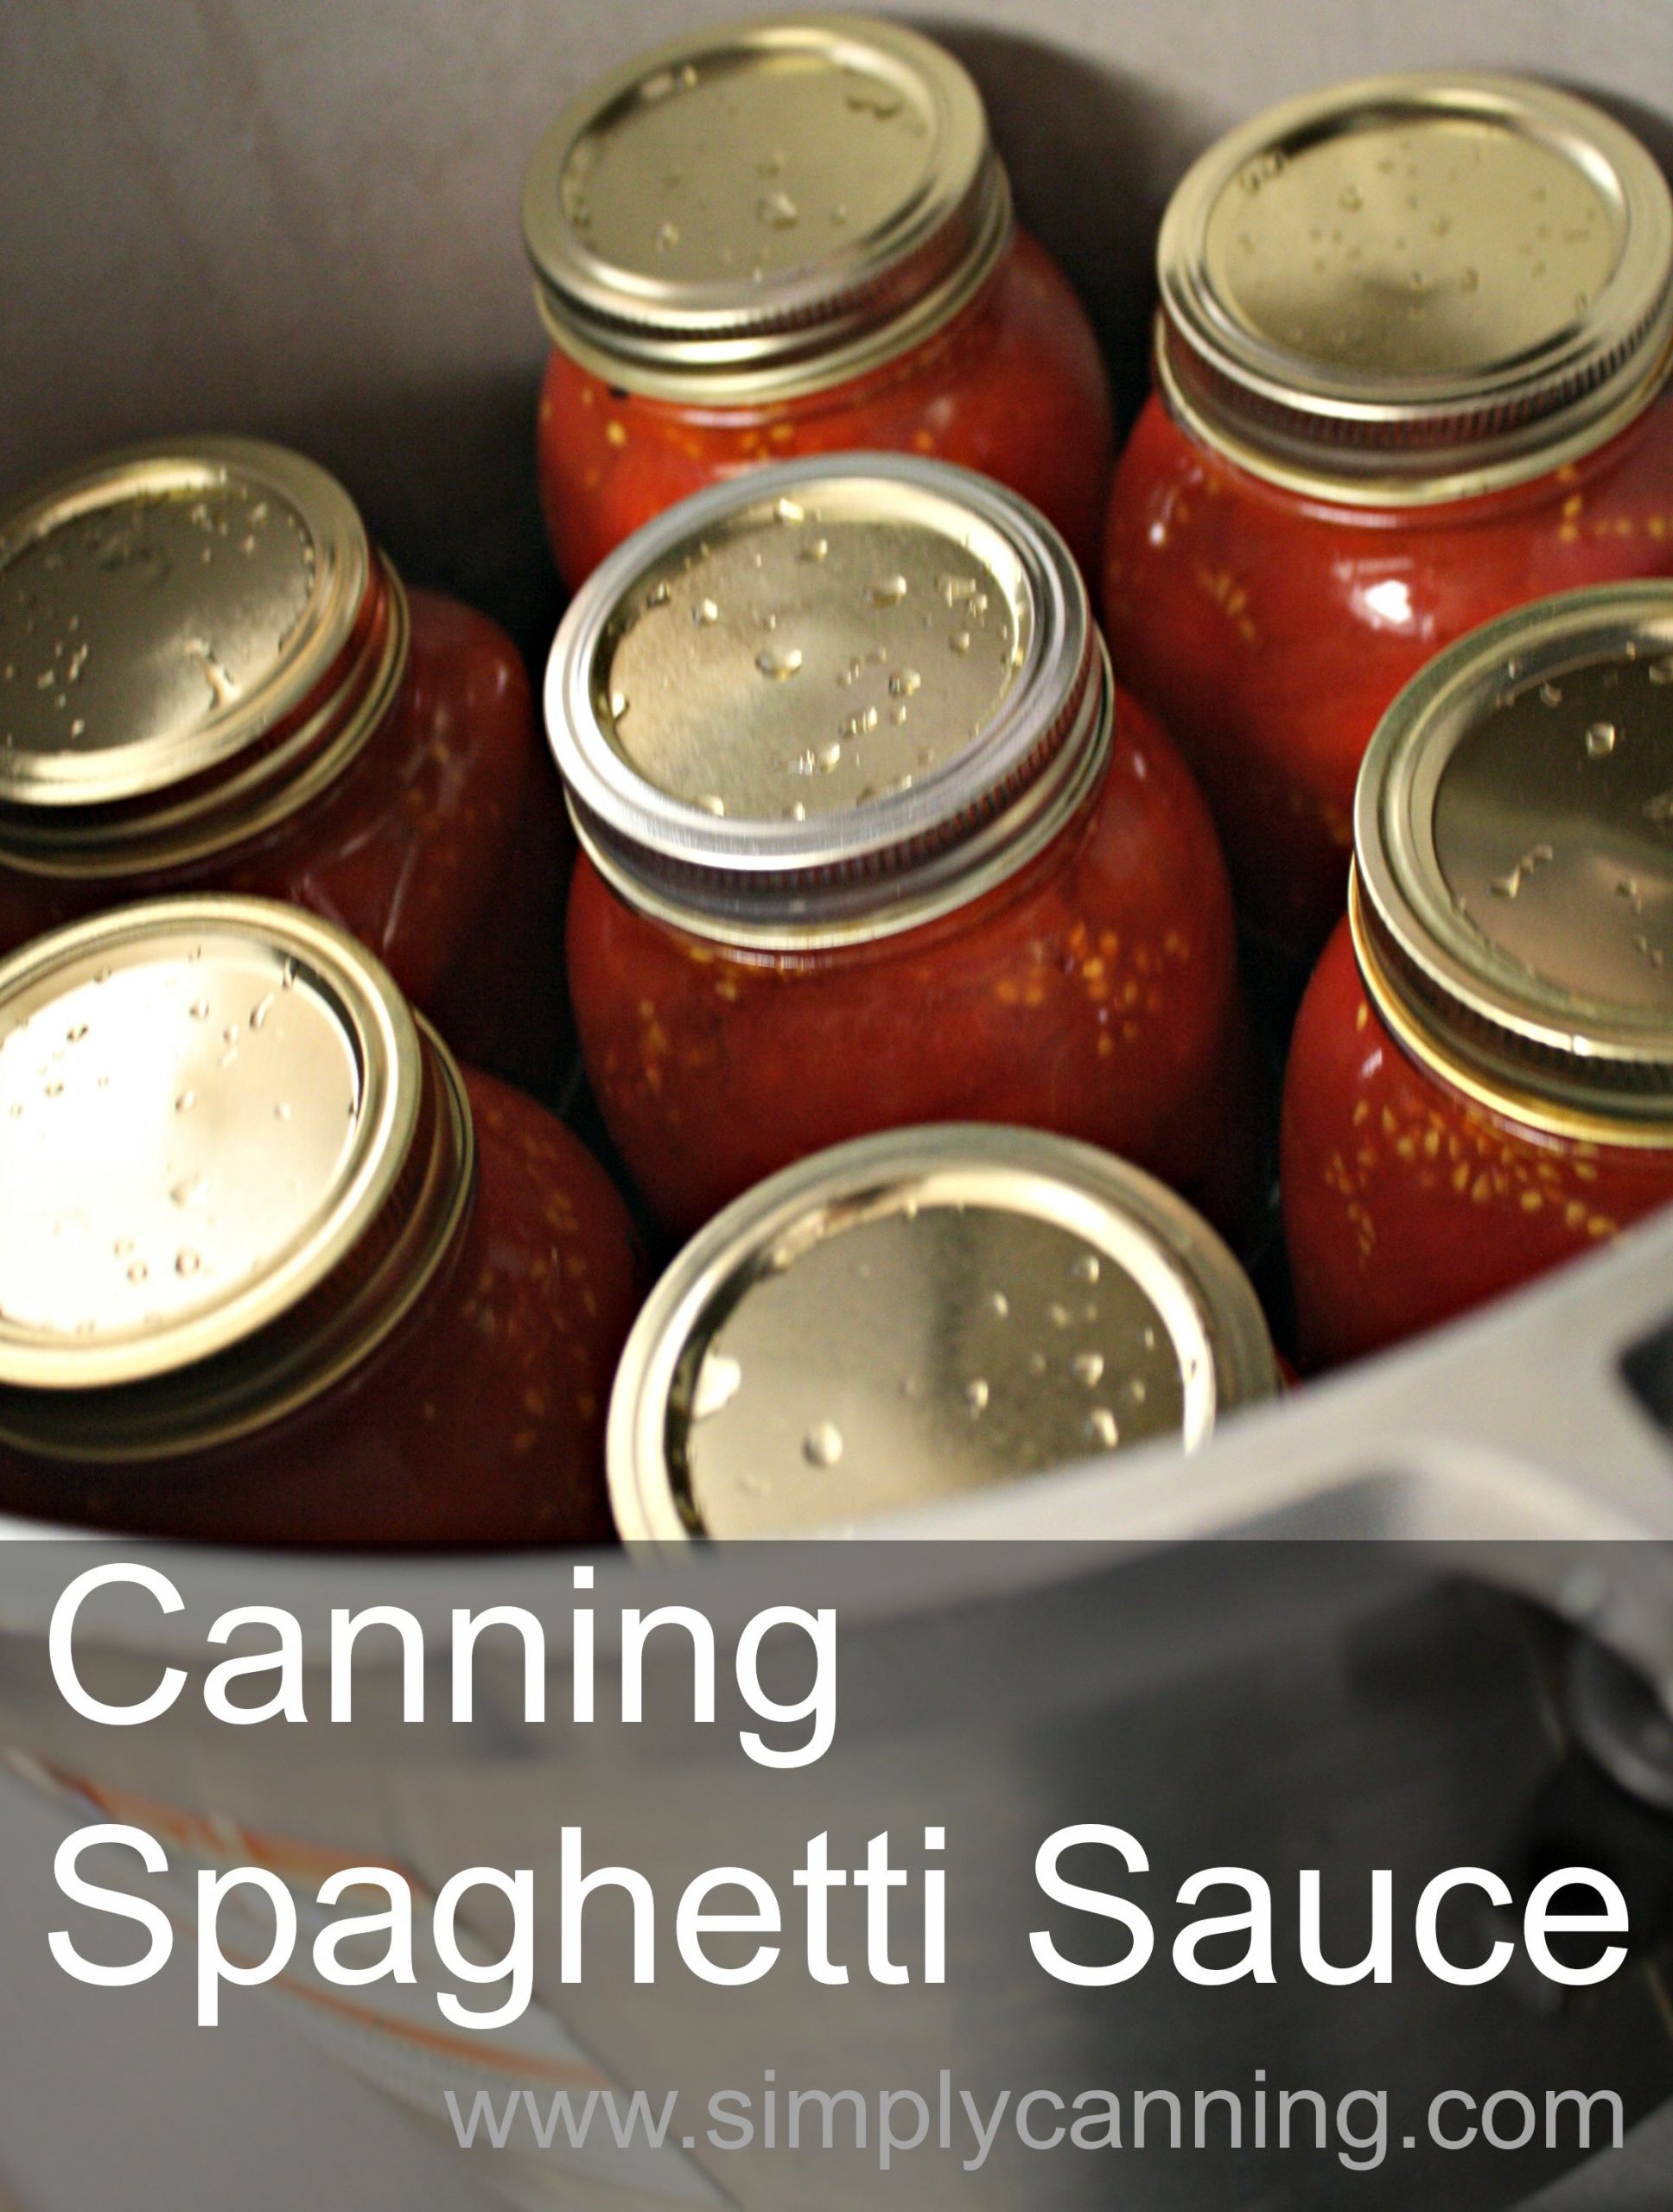 Spaghetti Sauce Canning Recipe
 Canning Spaghetti Sauce Recipe with meat that will save